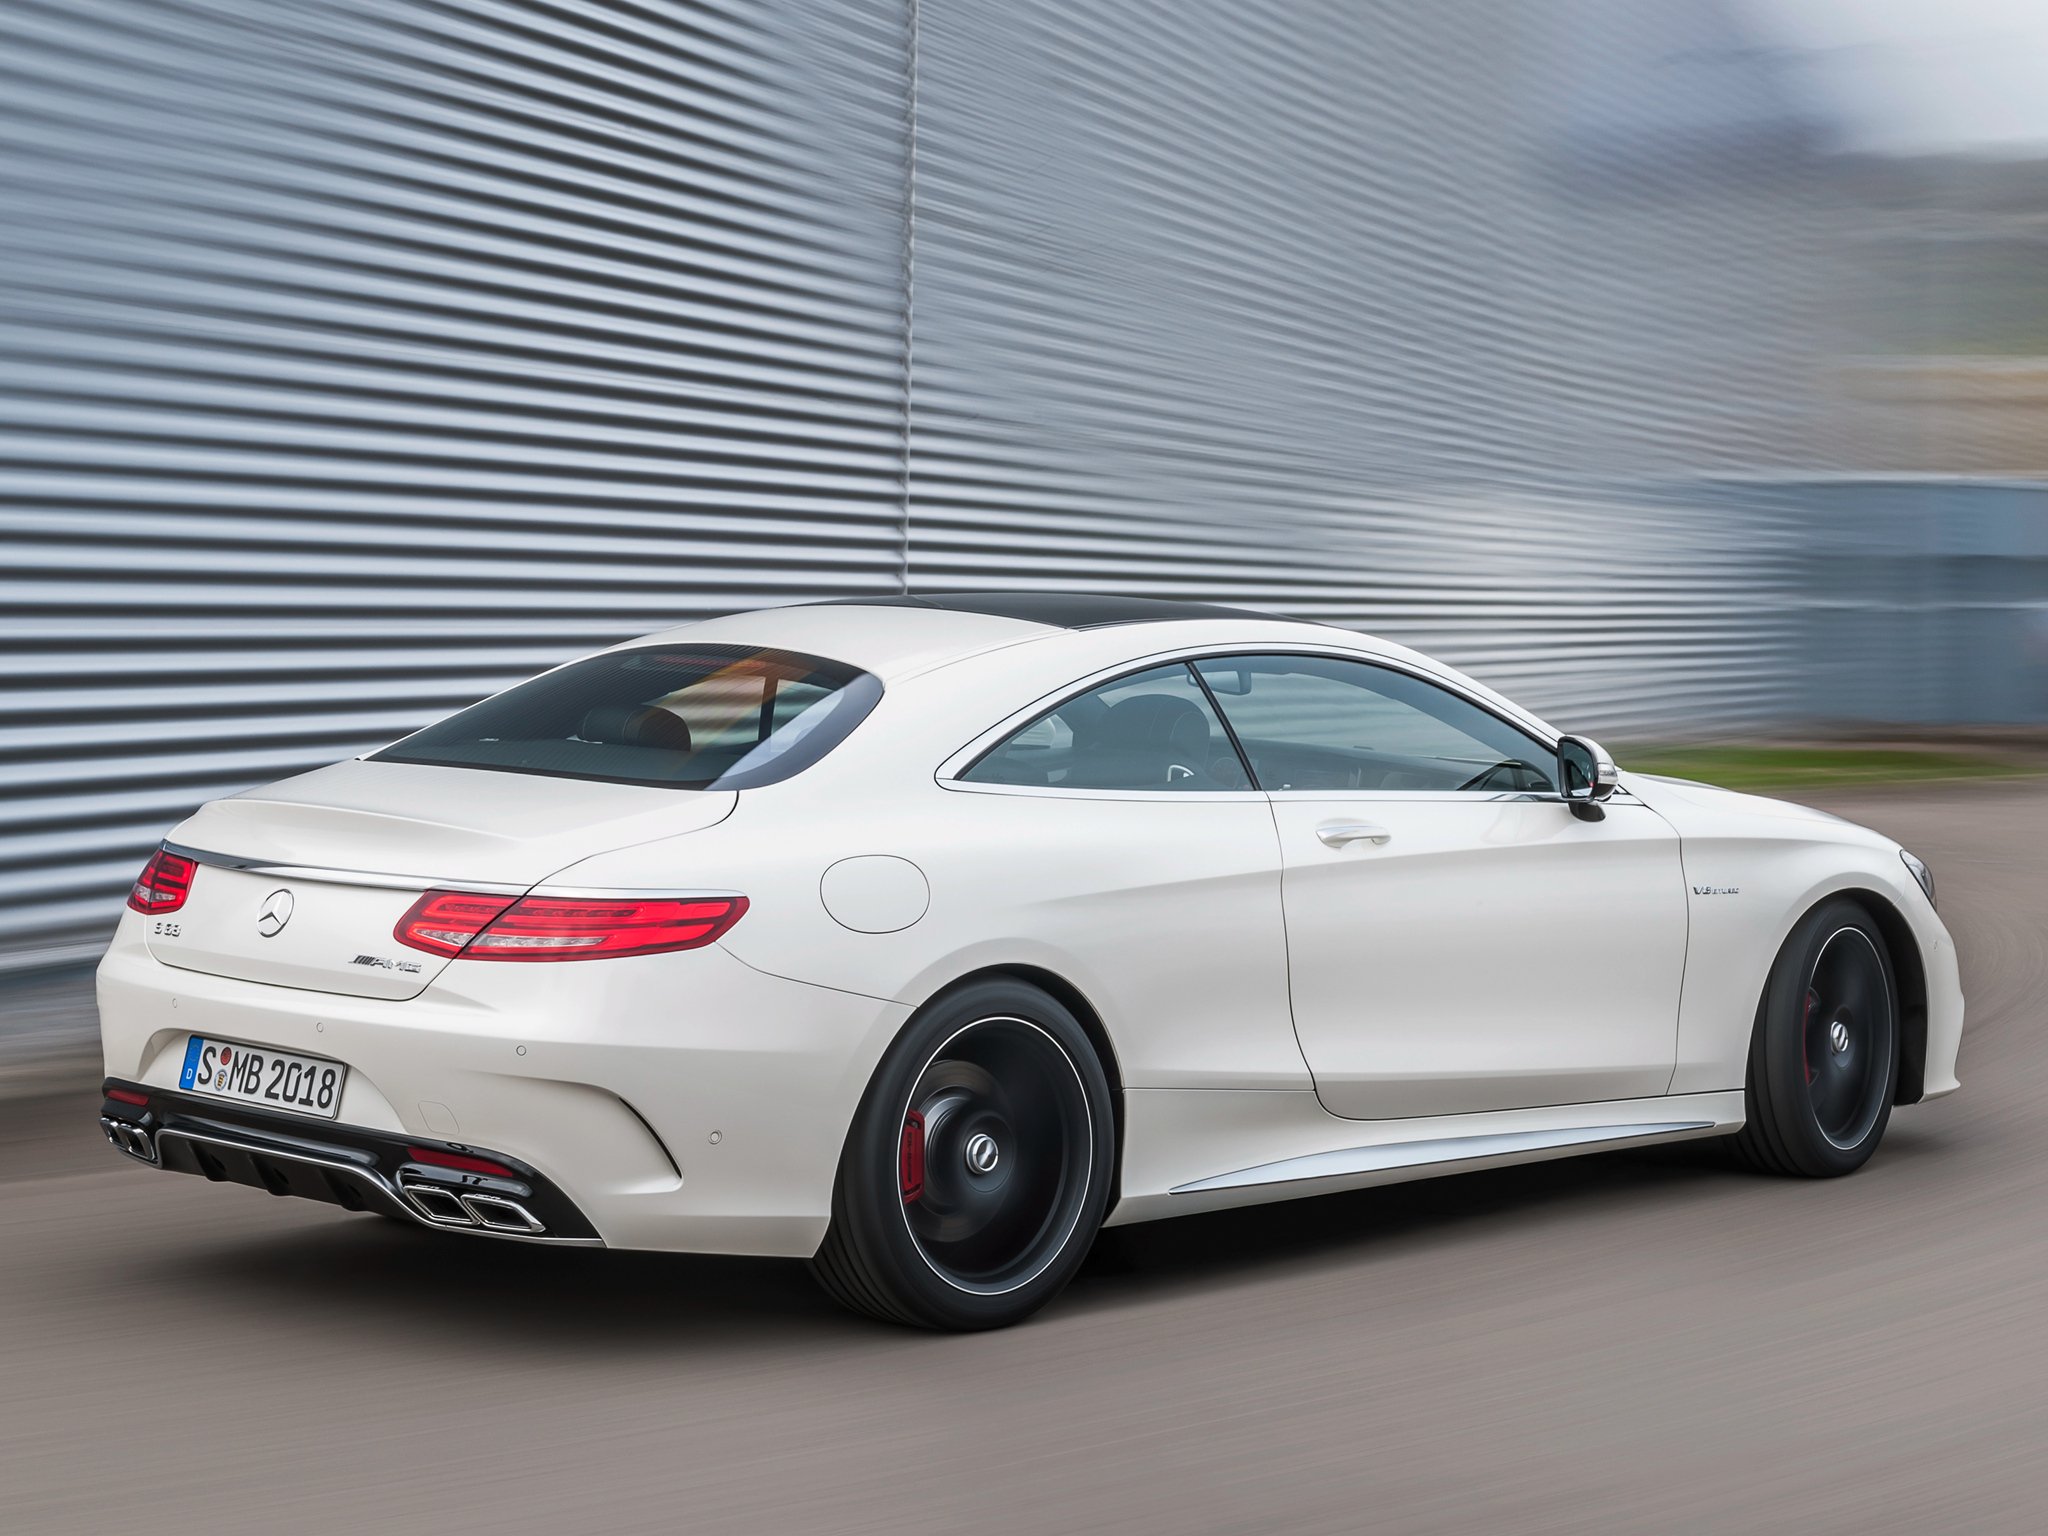 2014, Mercedes, Benz, S63, Amg, Coupe, C217 Wallpaper